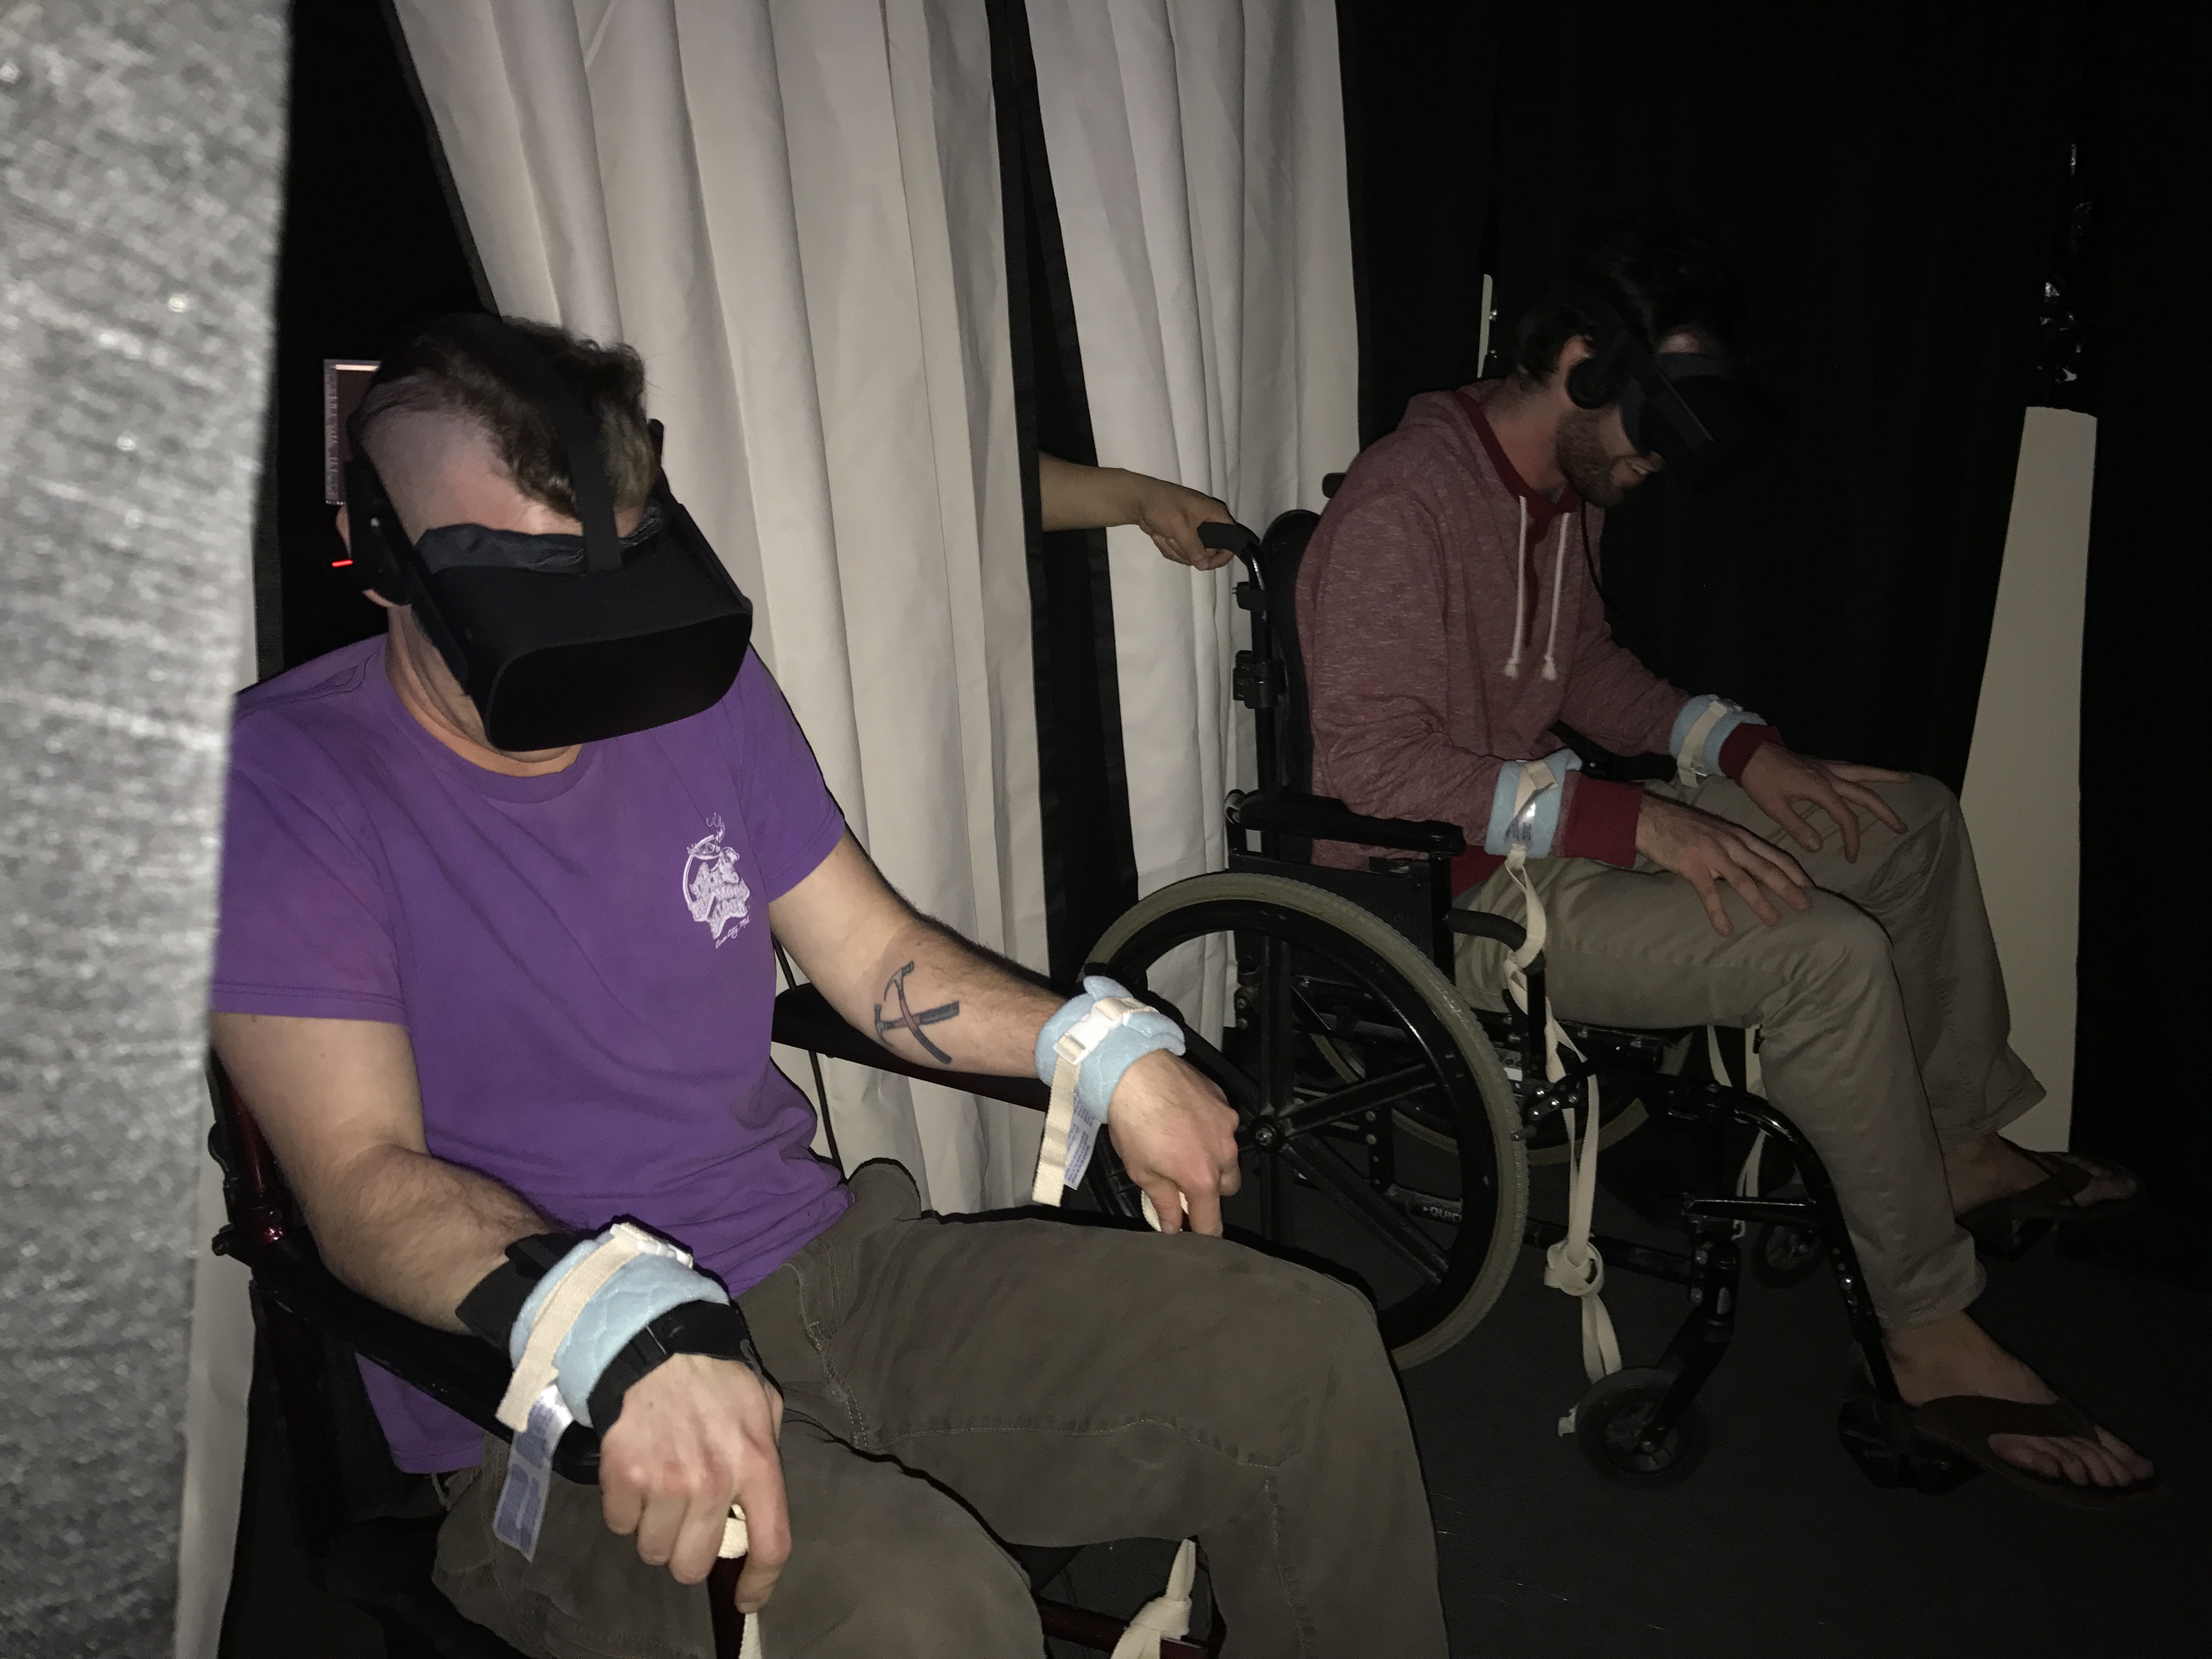 VR Haunted House, Virtual Reality Haunted House, haunted houses denver, Justin Mskowitz, Epic Brewing, Megan Carthel